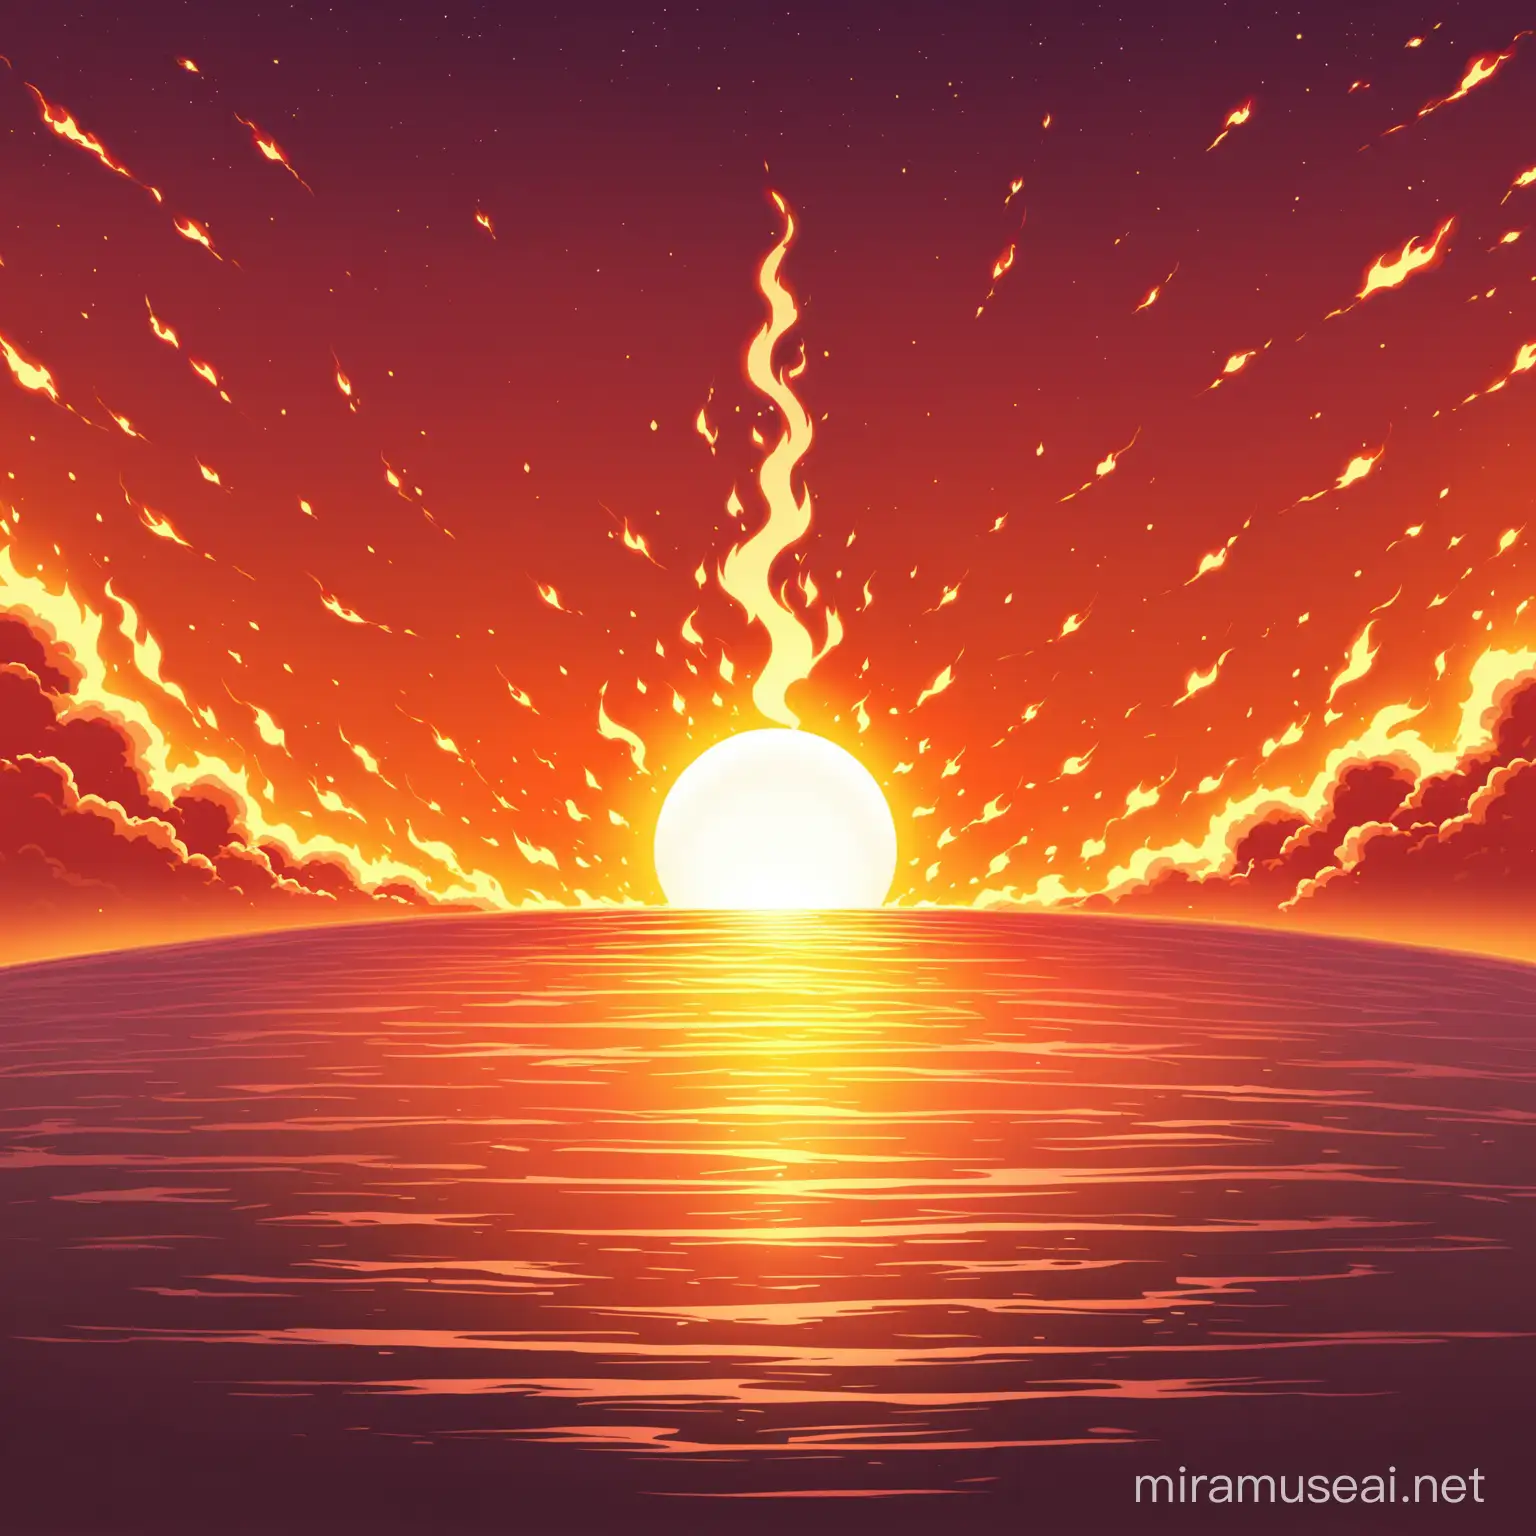 Create a background with a flaming sum and dawn sky